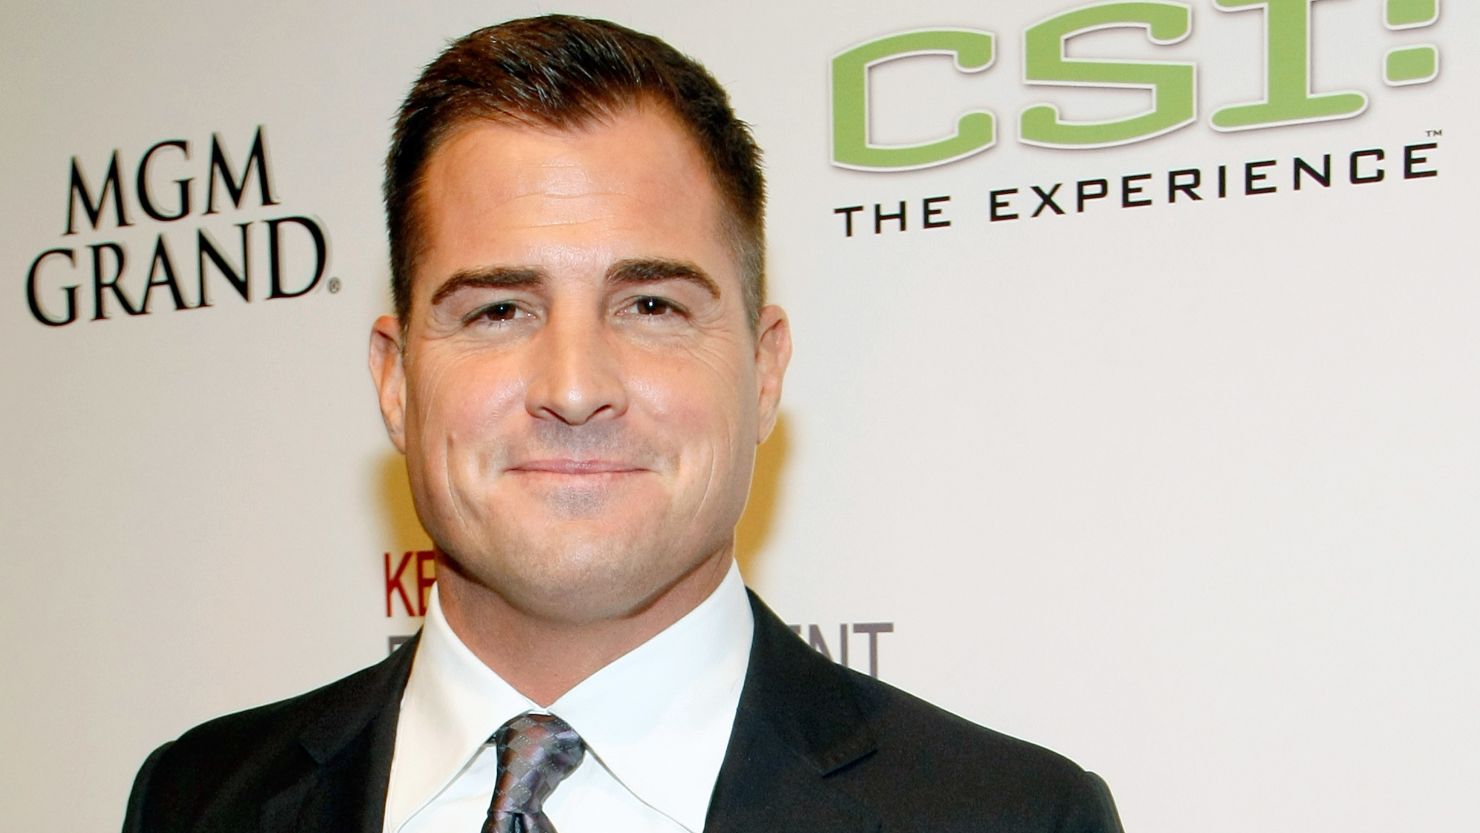 Actor George Eads has starred on "CSI" since its pilot episode in 2000.